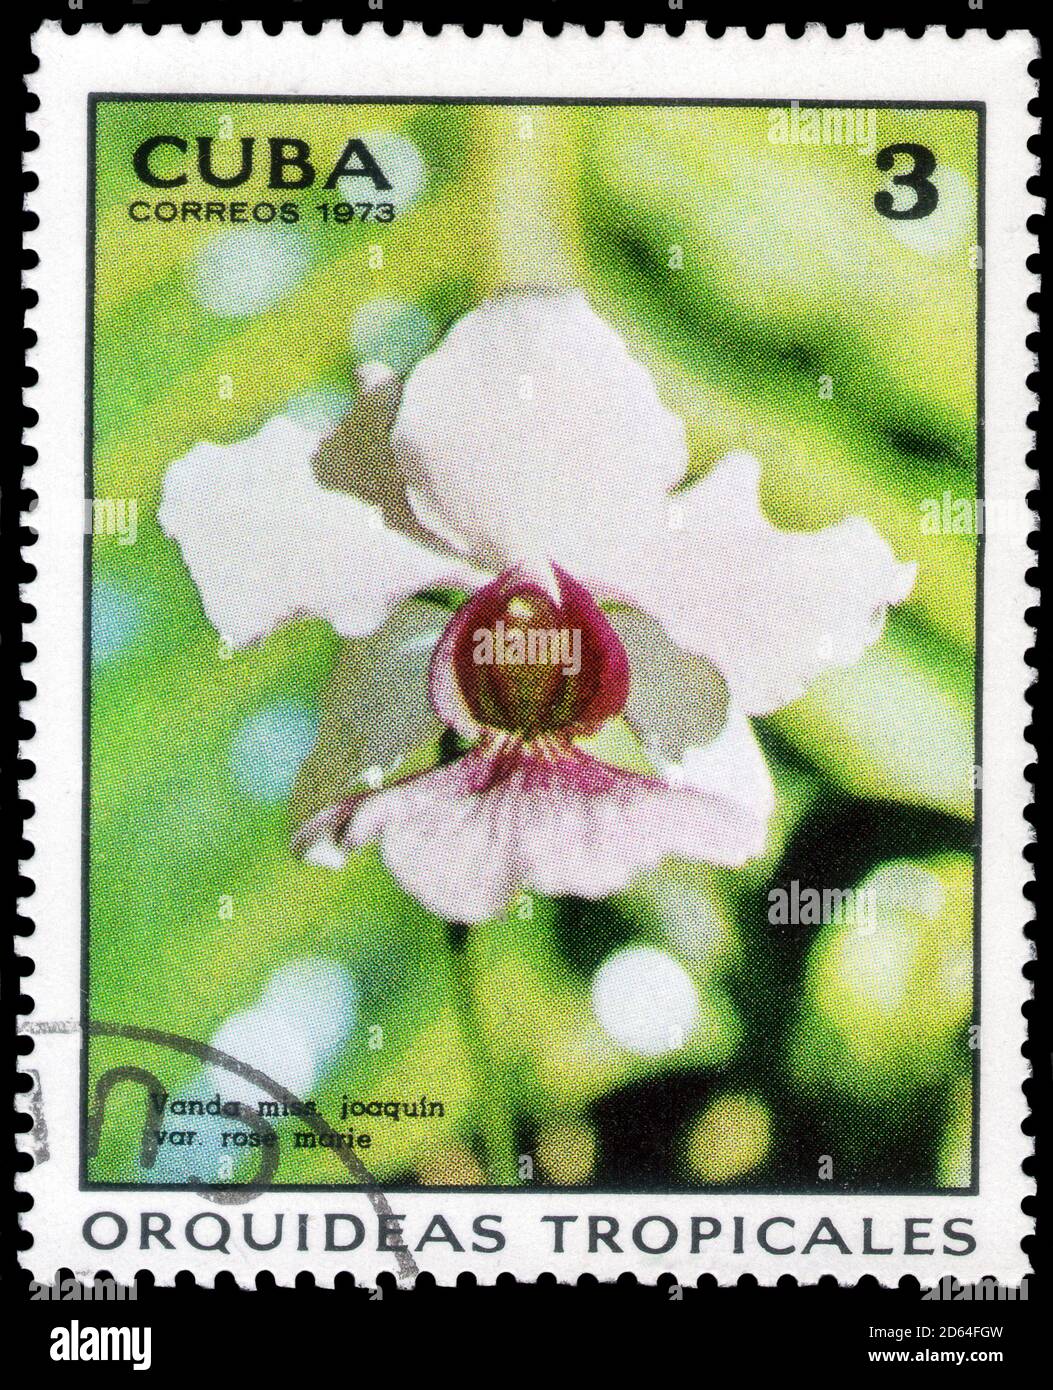 Saint Petersburg, Russia - September 18, 2020: Stamp printed in the Cuba with the image of the Vanda miss Joaquim var. Rose marie, circa 1973 Stock Photo